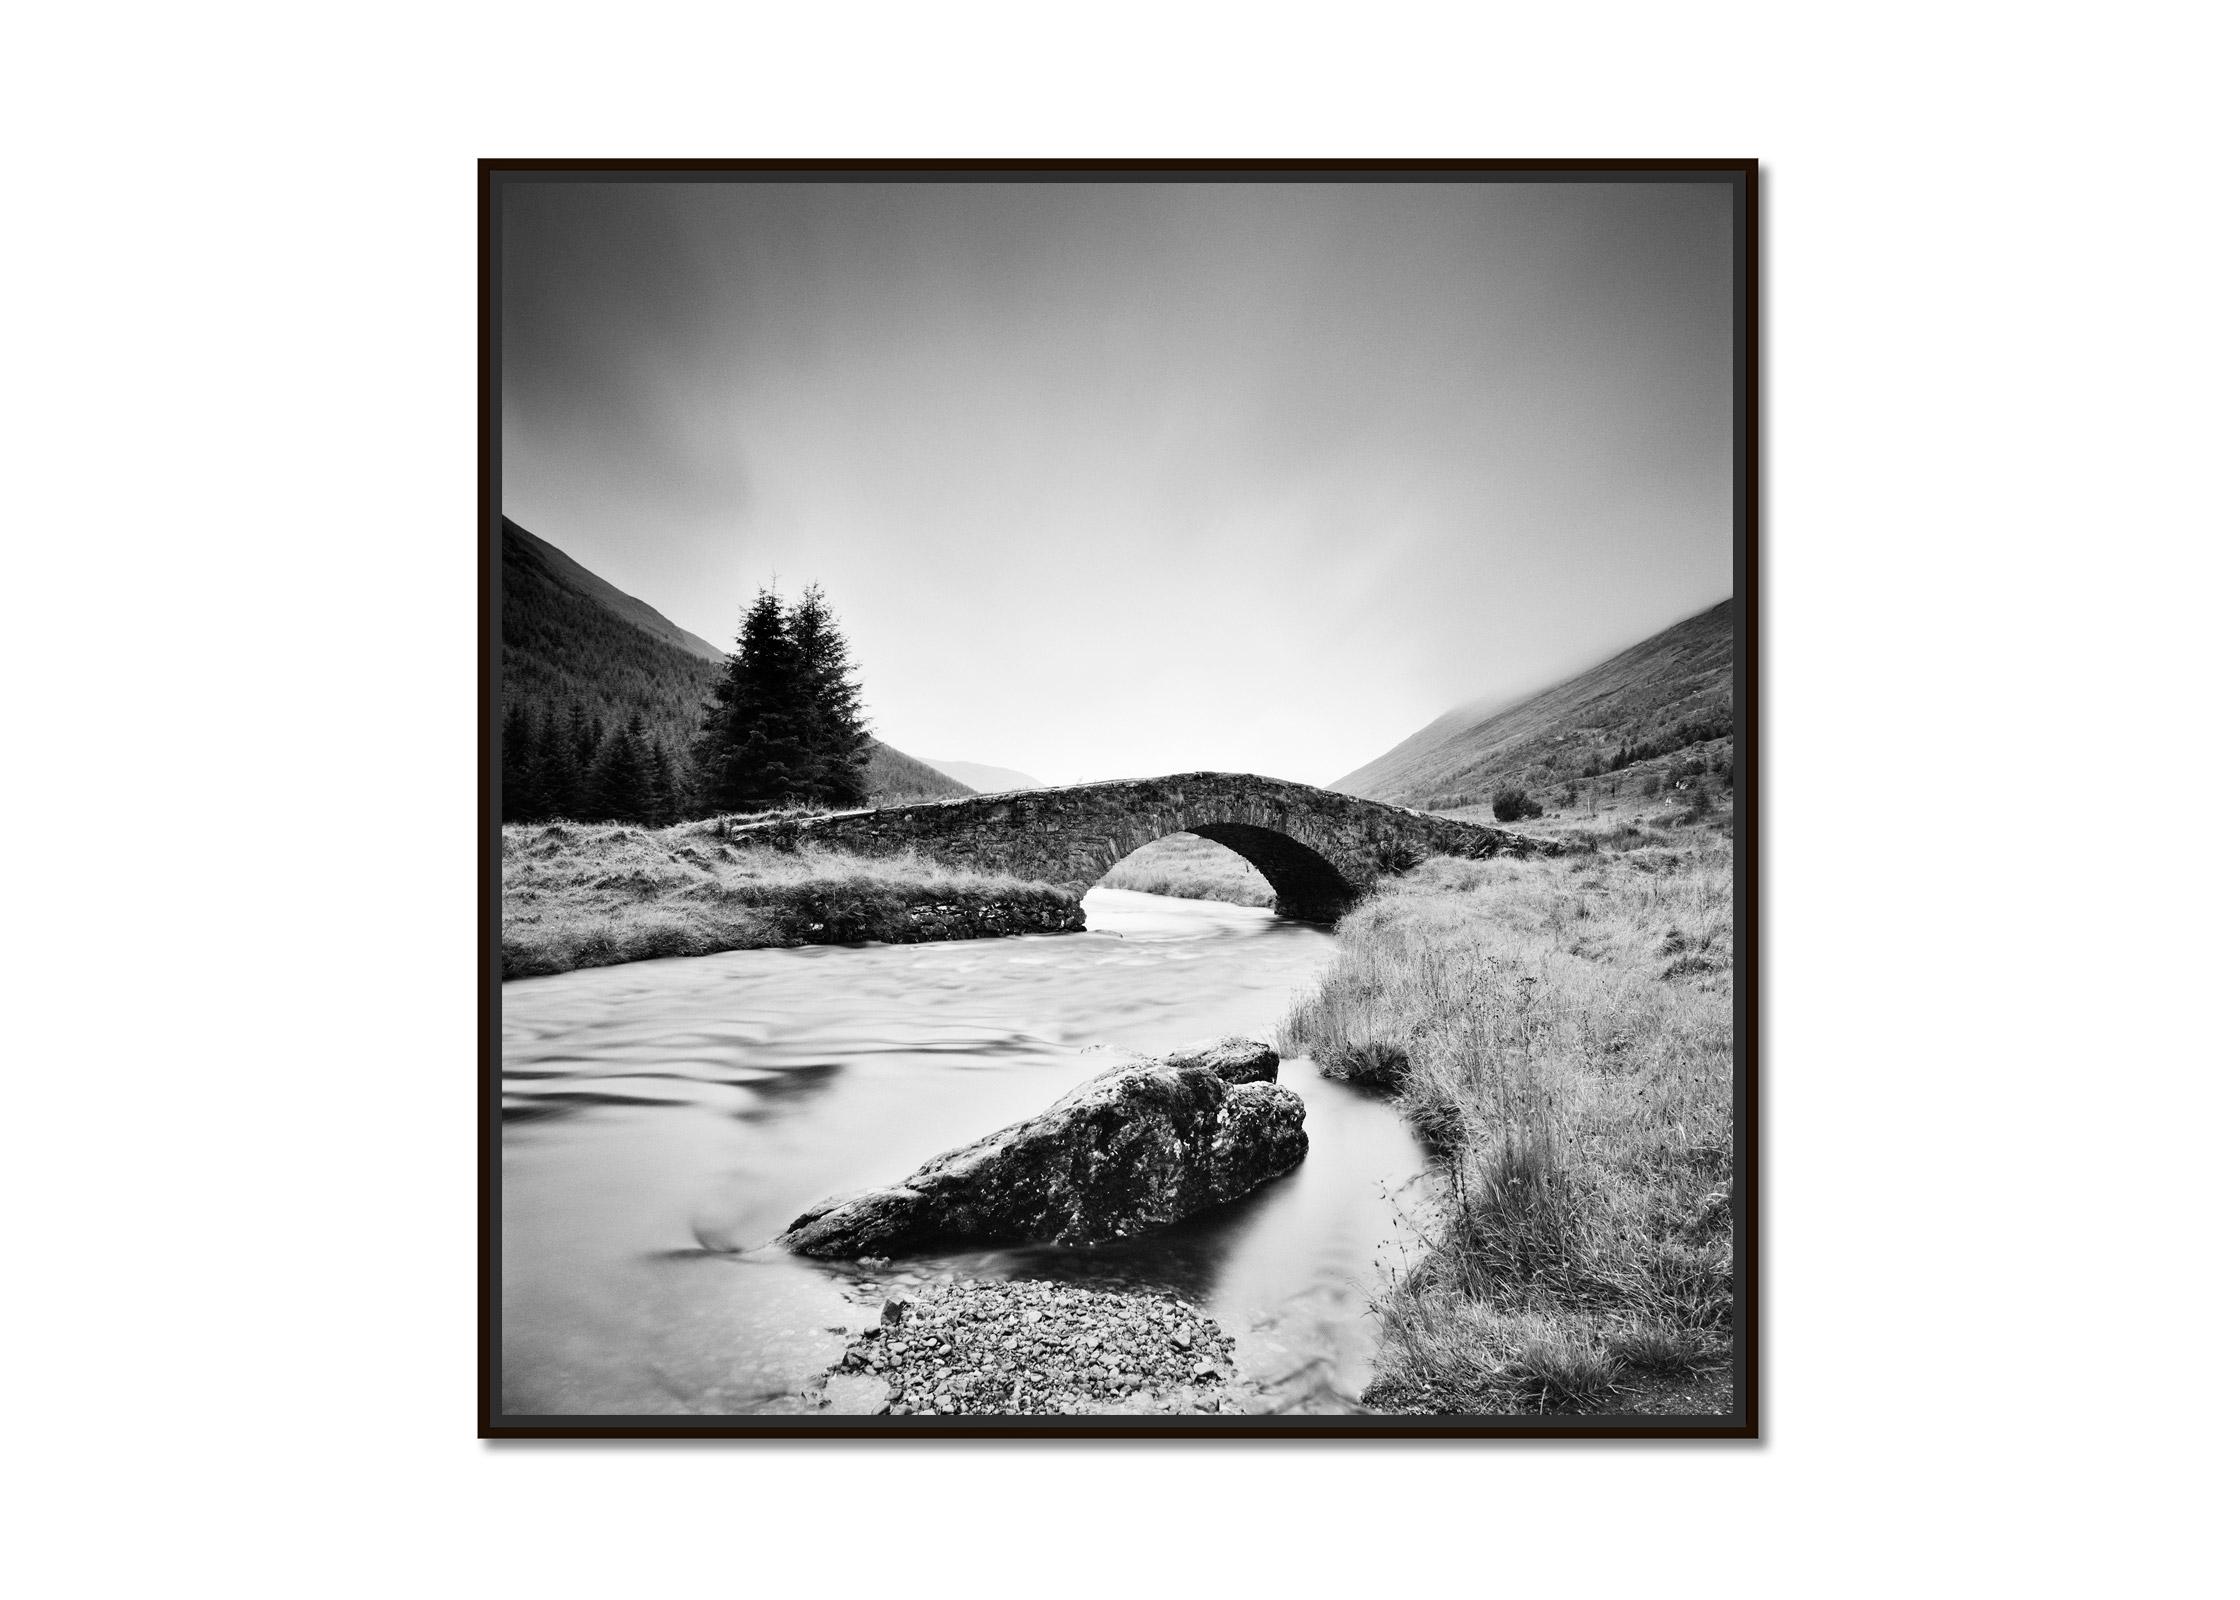 Stone Bridge, Highlands, Scotland, black and white fineart landscape photography - Photograph by Gerald Berghammer